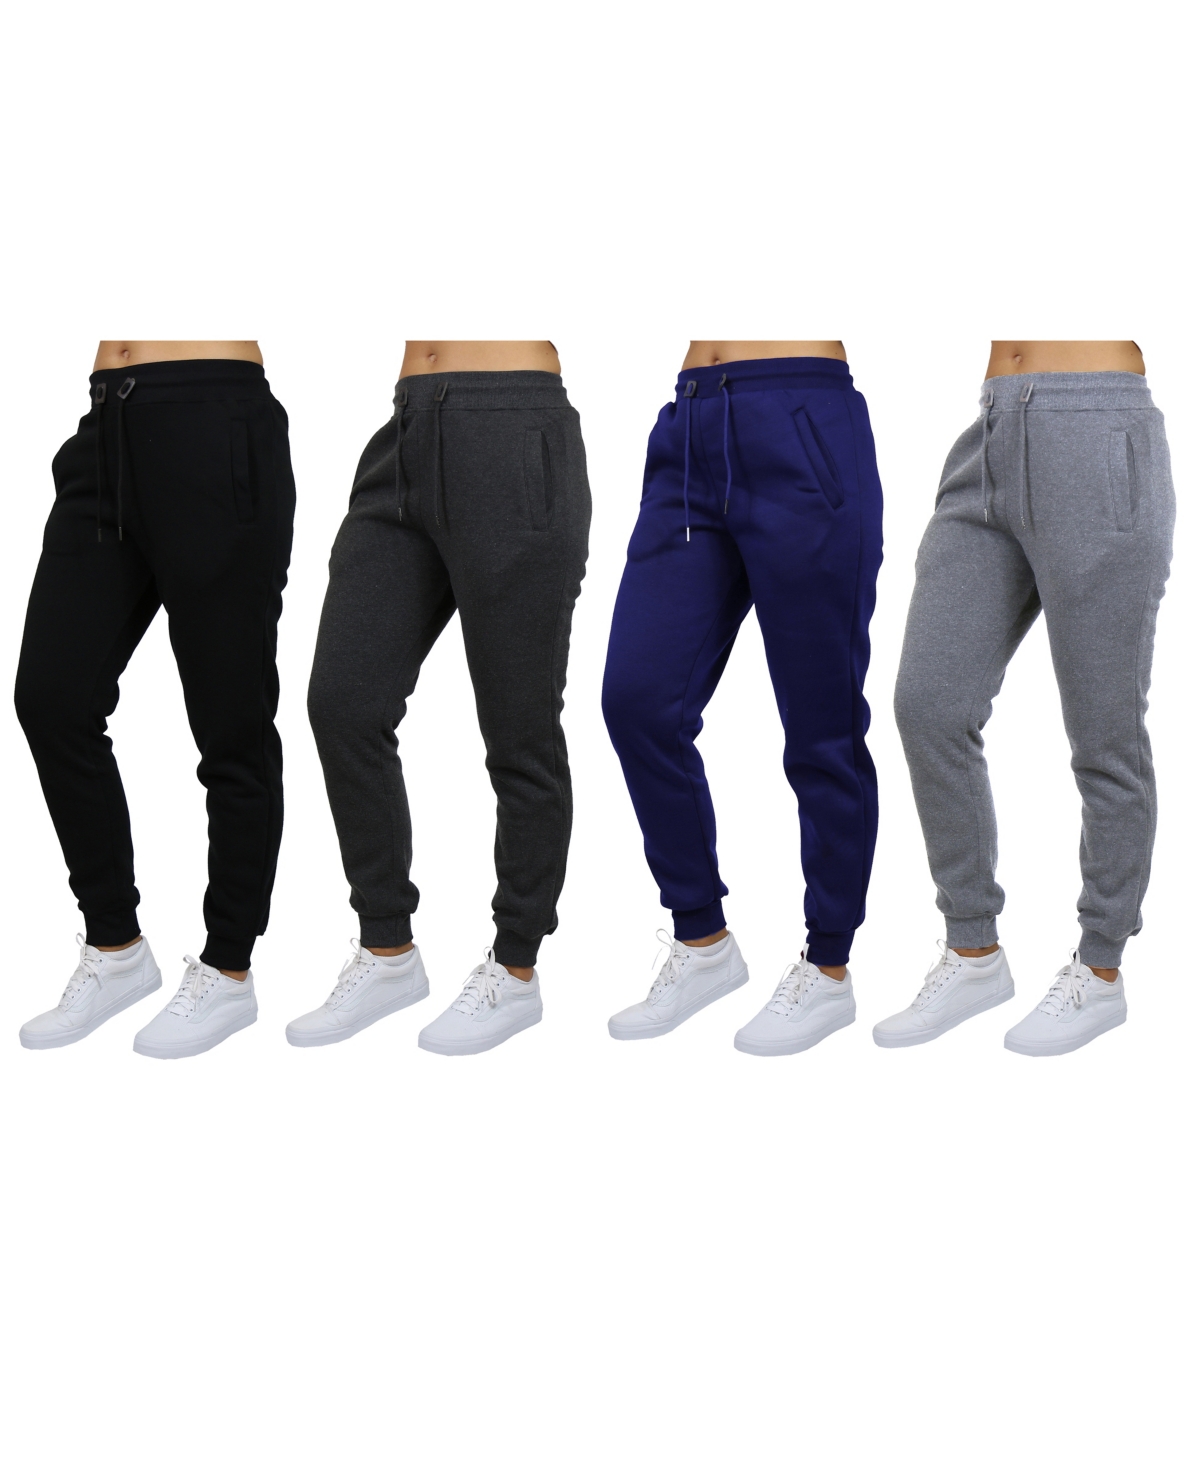 Galaxy By Harvic Women's Loose-Fit Fleece Jogger Sweatpants-4 Pack